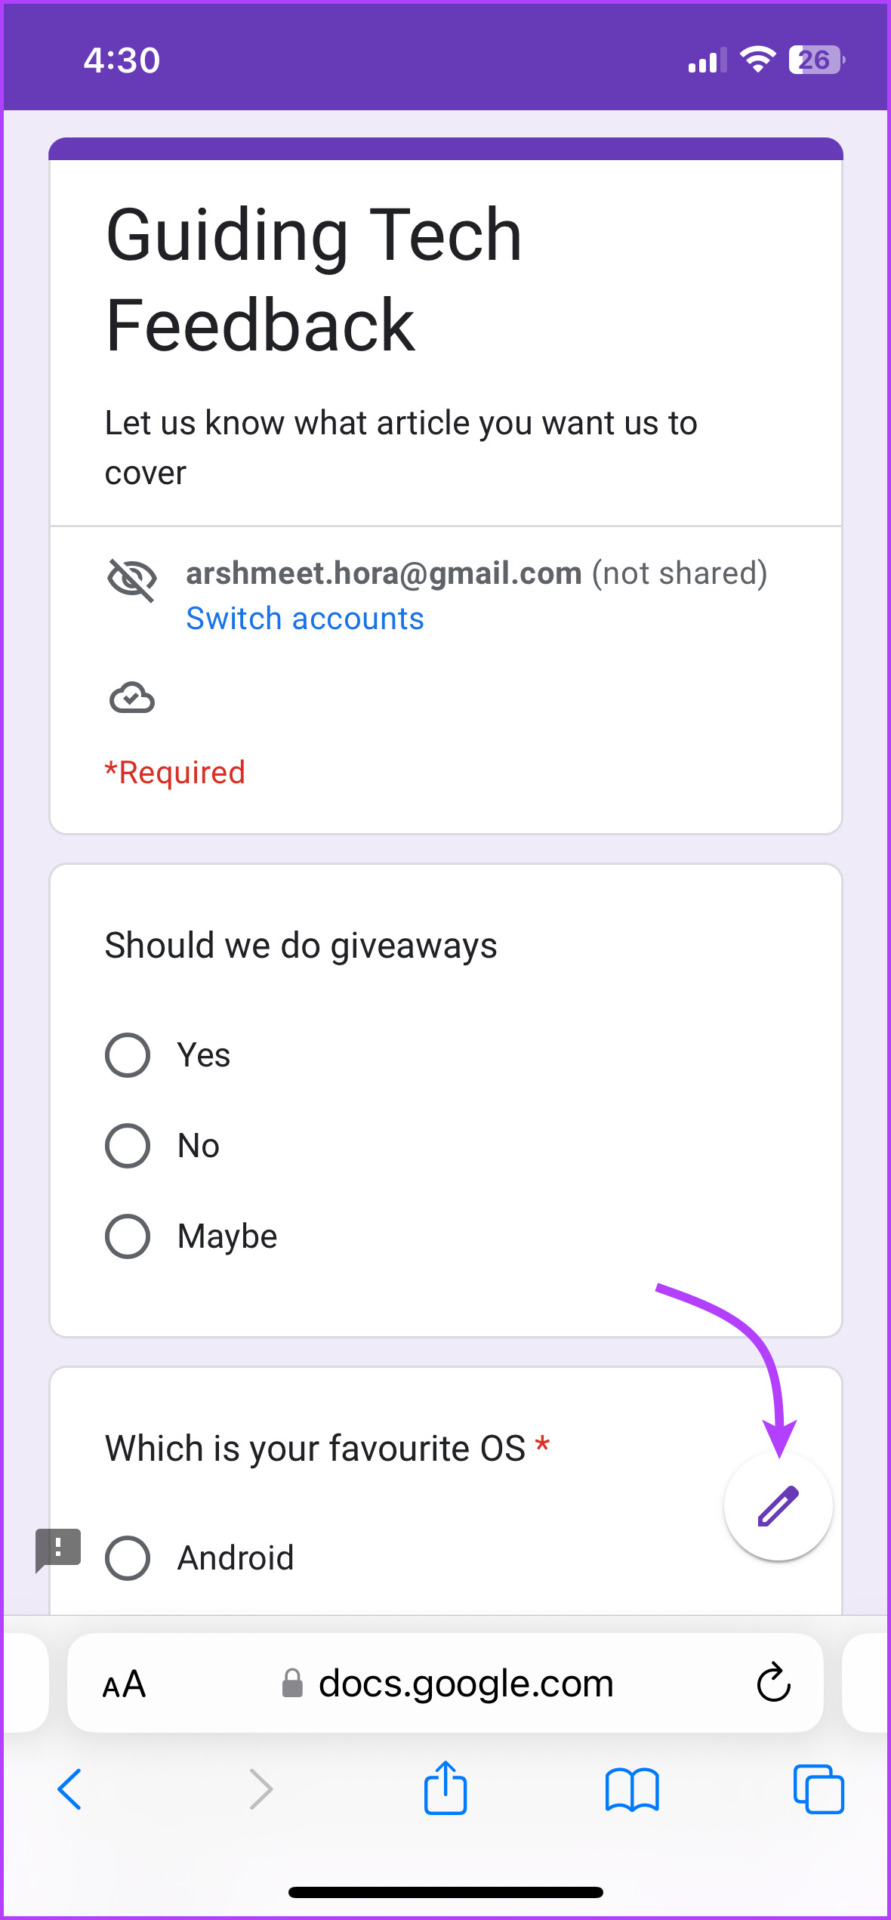 Tap the pencil icon to edit Google Forms